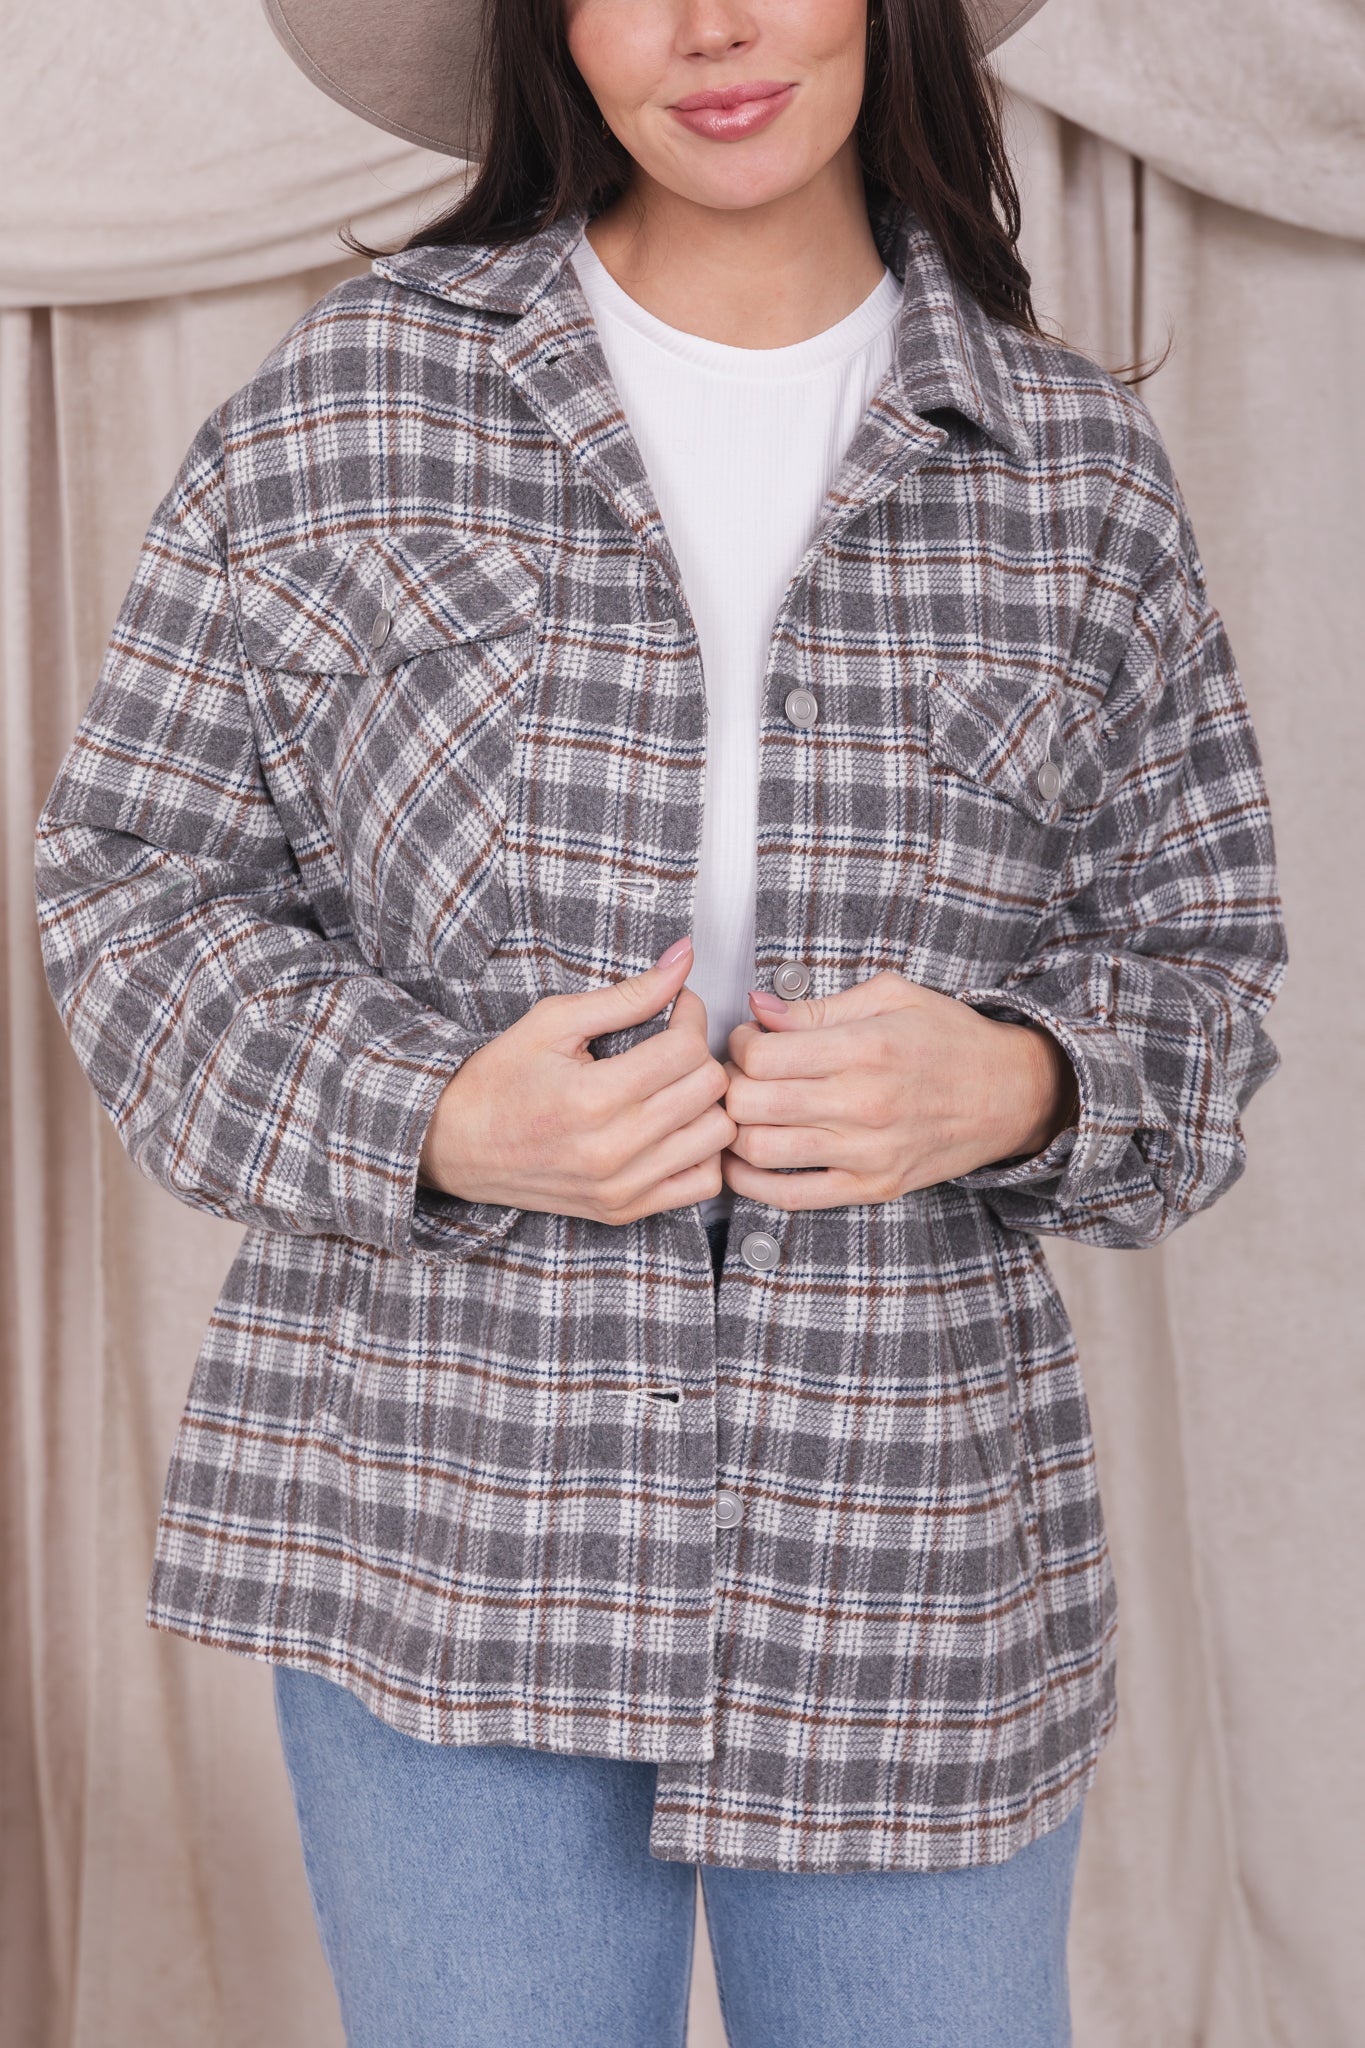 PLAID JACKET IN FADED GRAY FLANNEL FINAL SALE